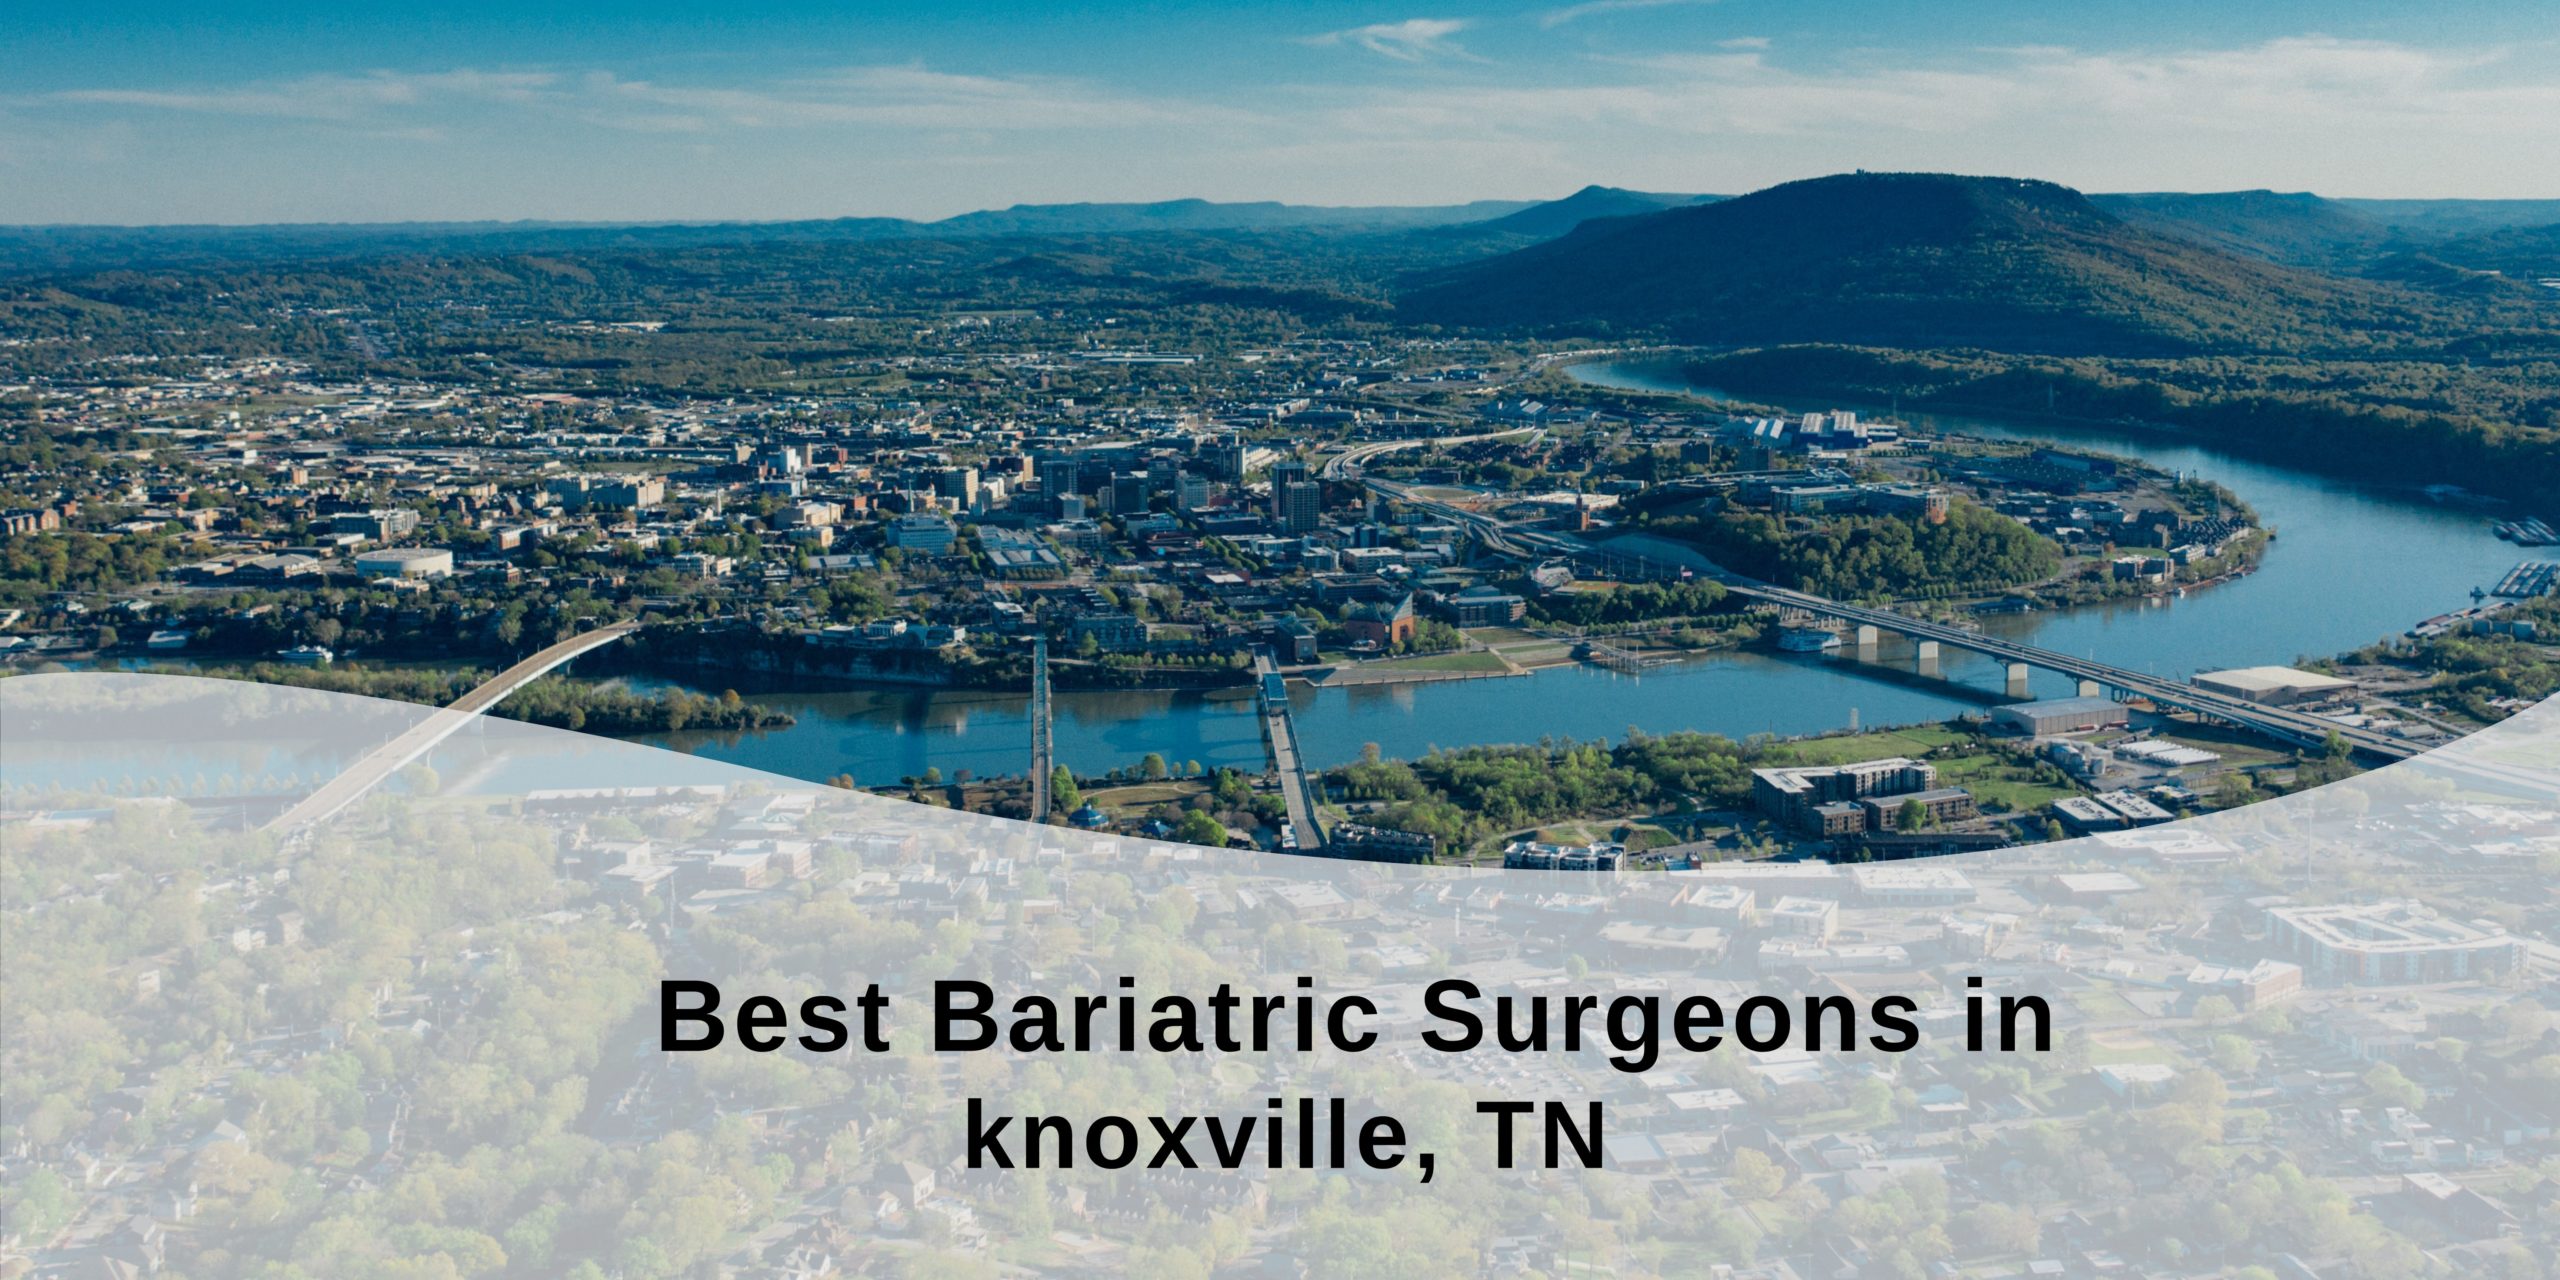 Best Bariatric Surgeons in knoxville, TN